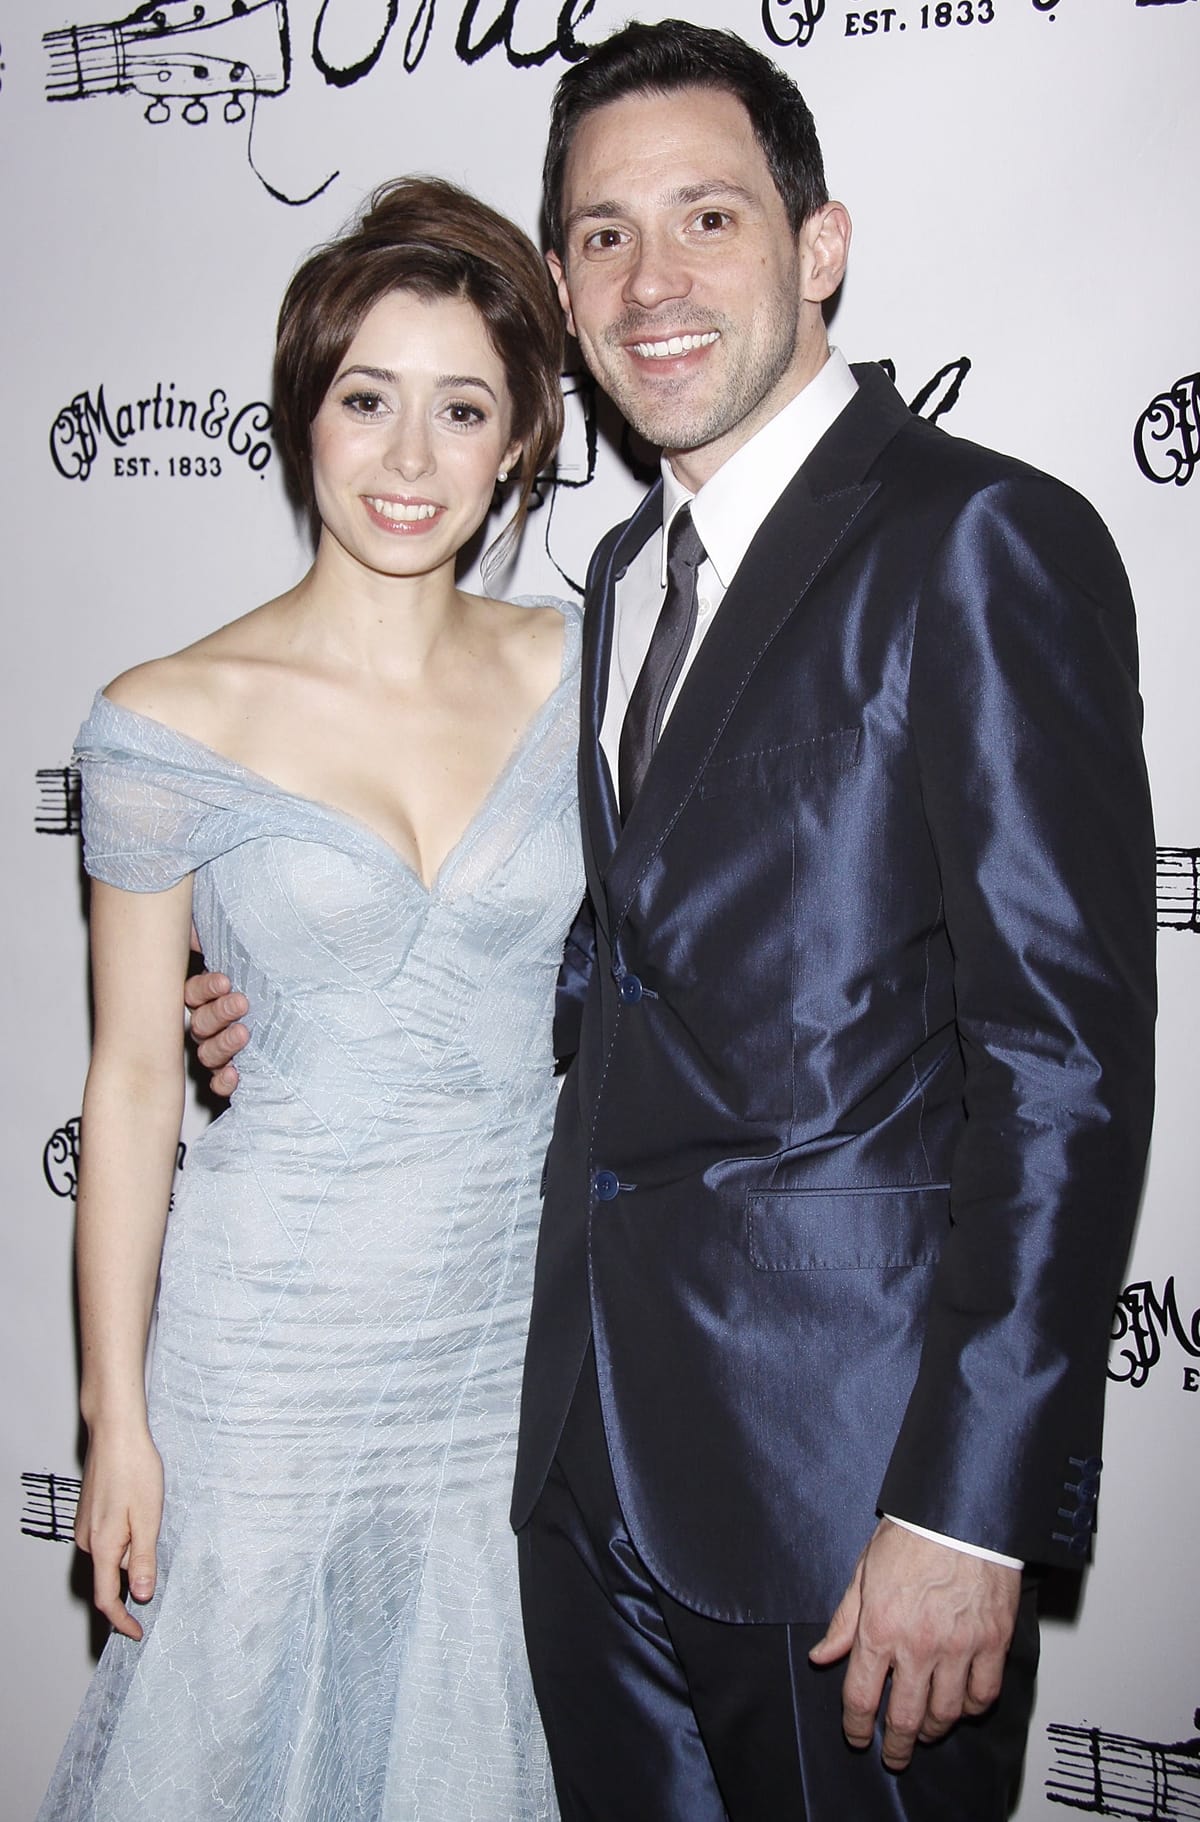 Cristin Milioti and Steve Kazee dated briefly in fall 2012 and he was featured on her song “A Thousand Years, Pt. 2” for the second installment of the Twilight saga’s Breaking Dawn